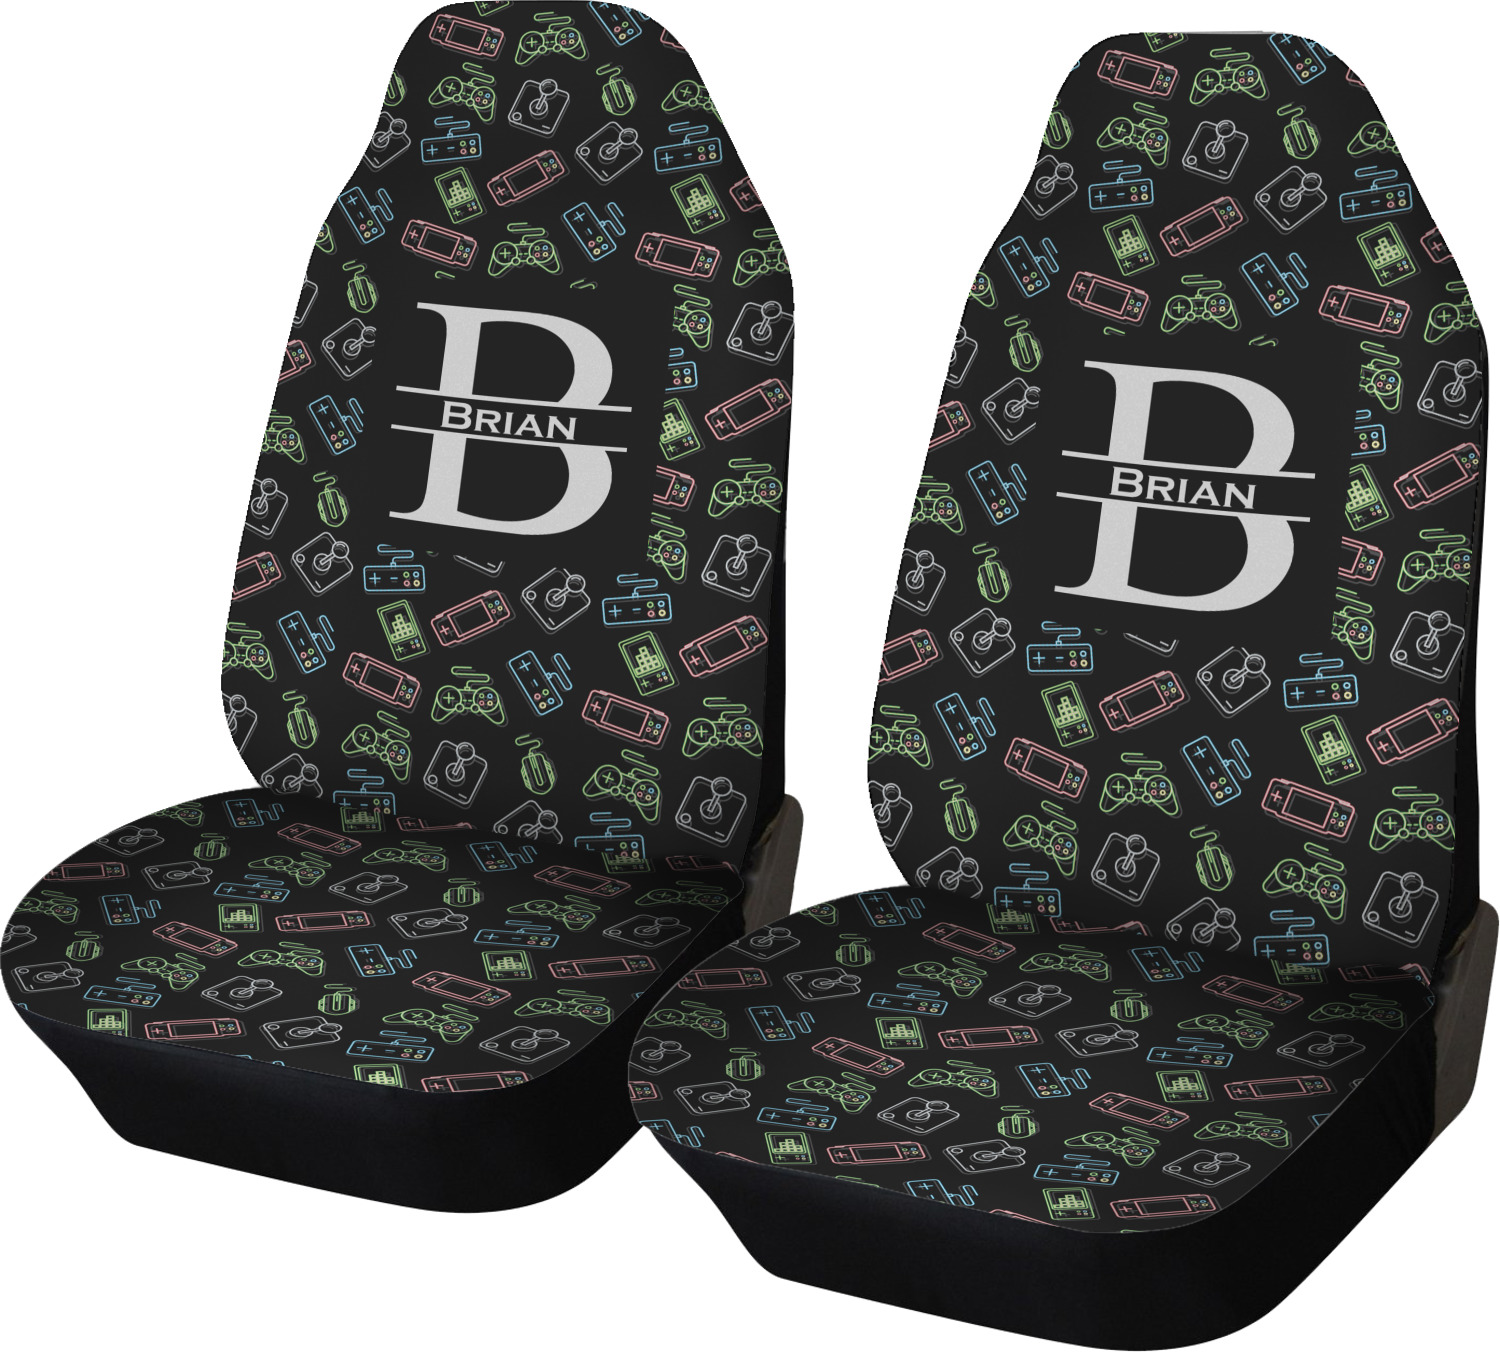 Custom Video Game Car Seat Covers (Set of Two) (Personalized)